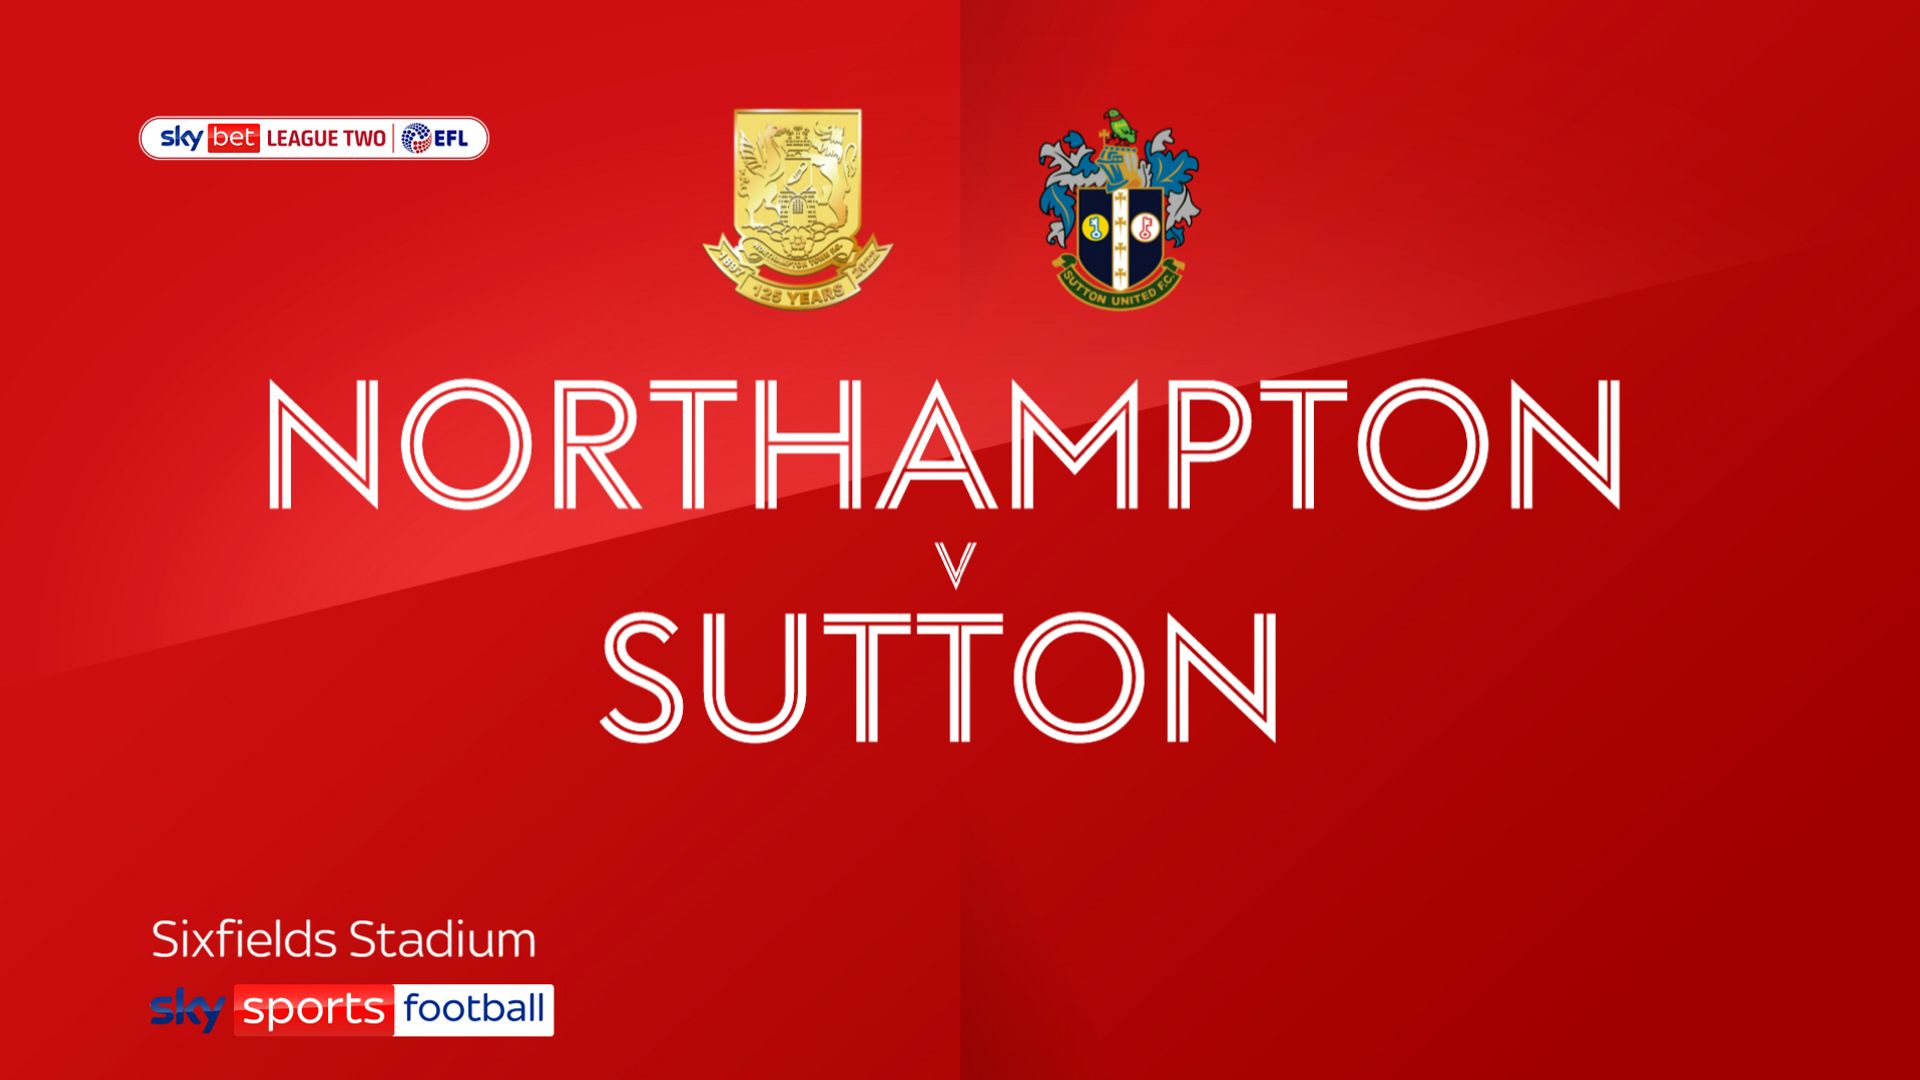 Sutton hit back to hold Northampton